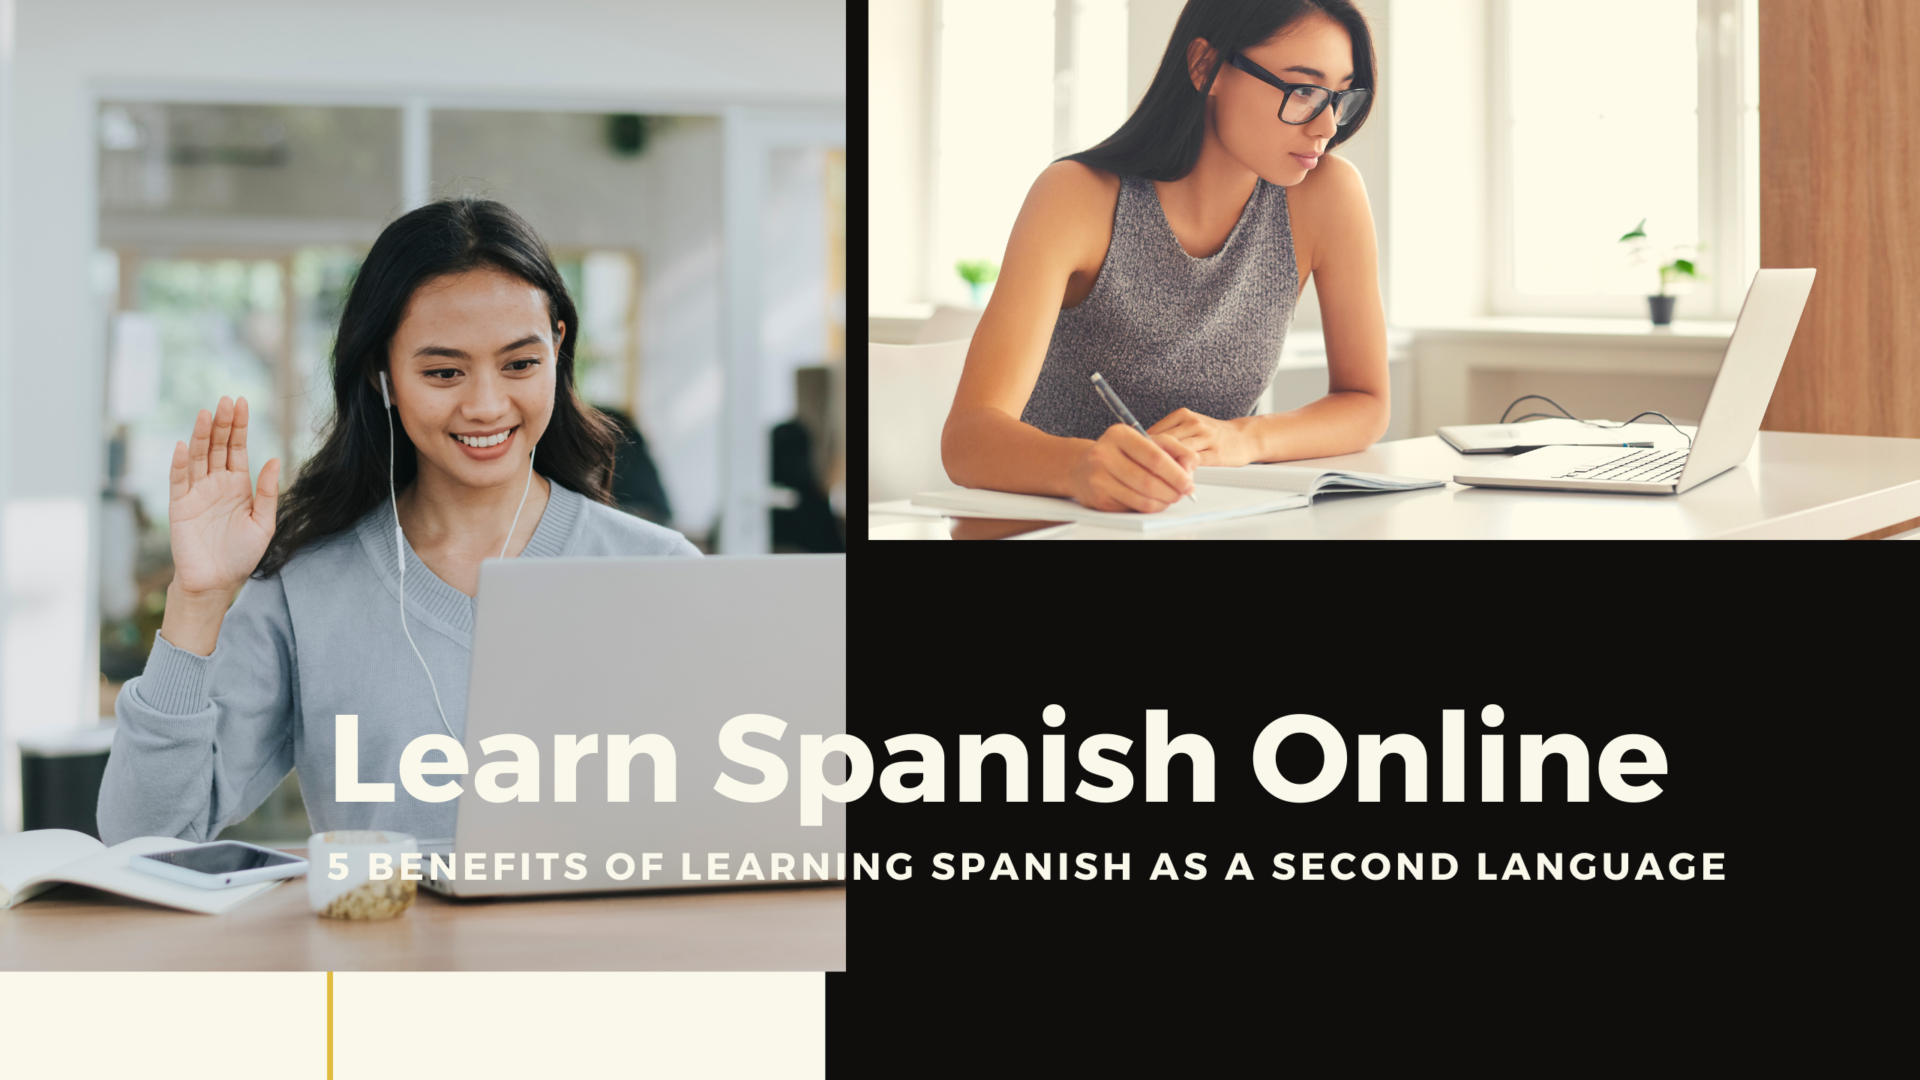 5 Benefits of Learning Spanish as a Second Language